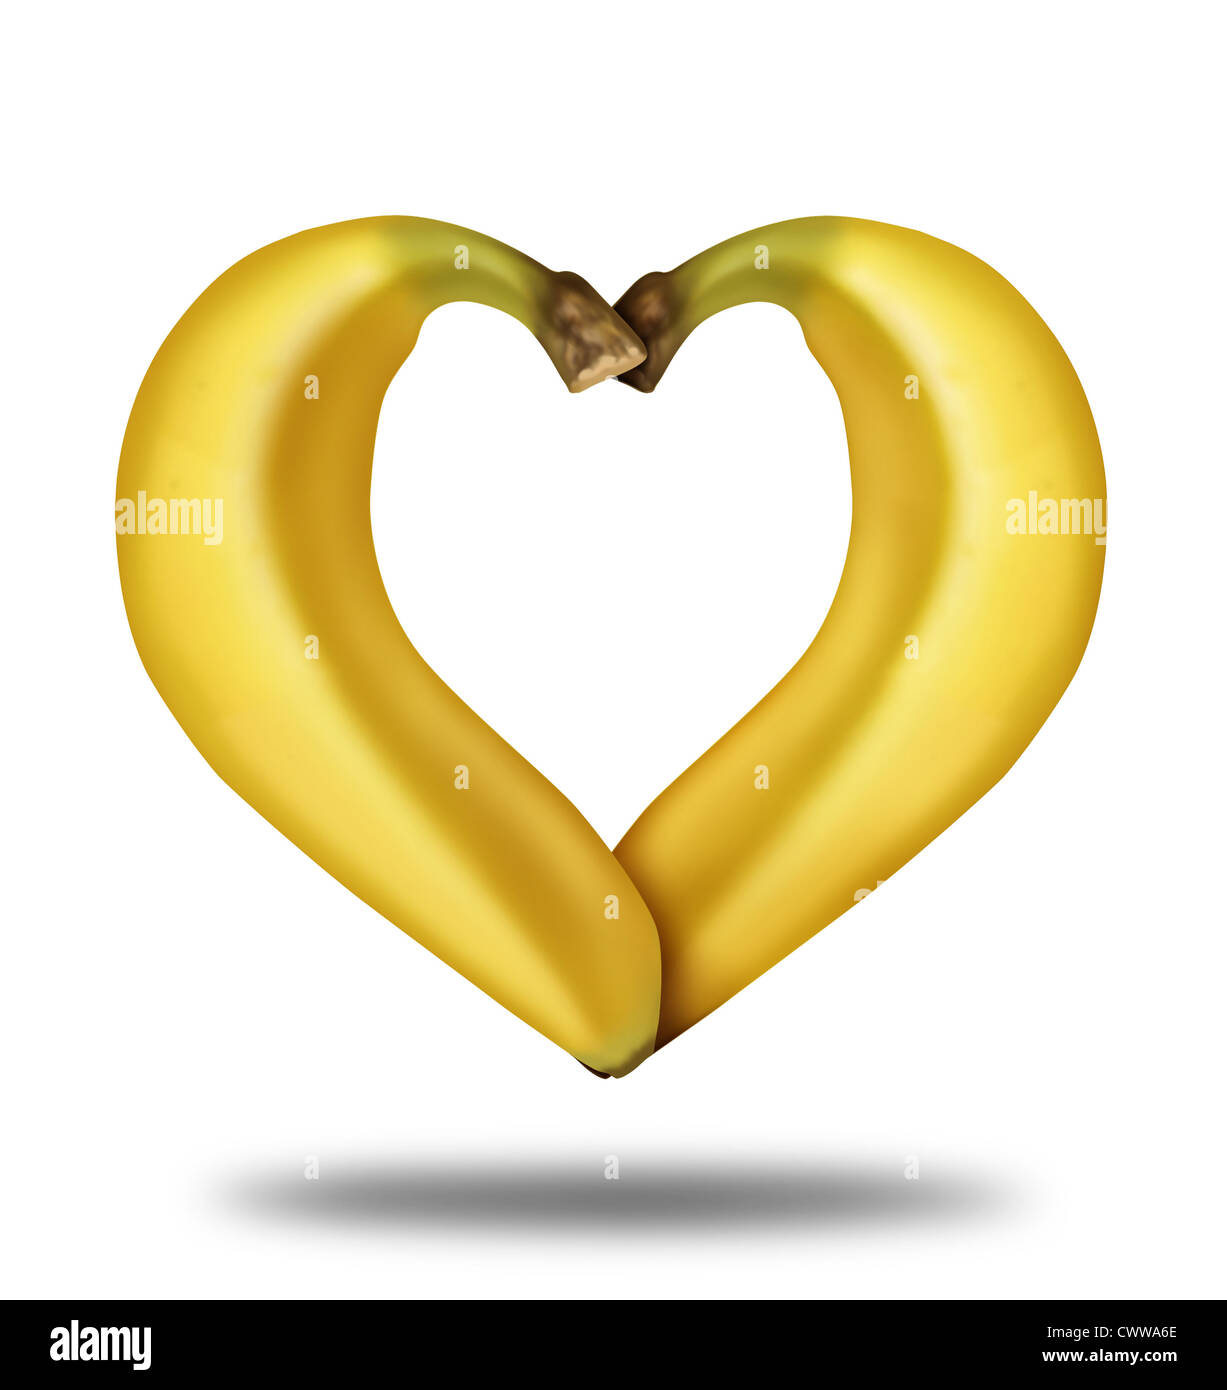 Healthy lifestyle symbol represented by bananas in the shape of a heart to show the health concept of eating well with fruits an Stock Photo